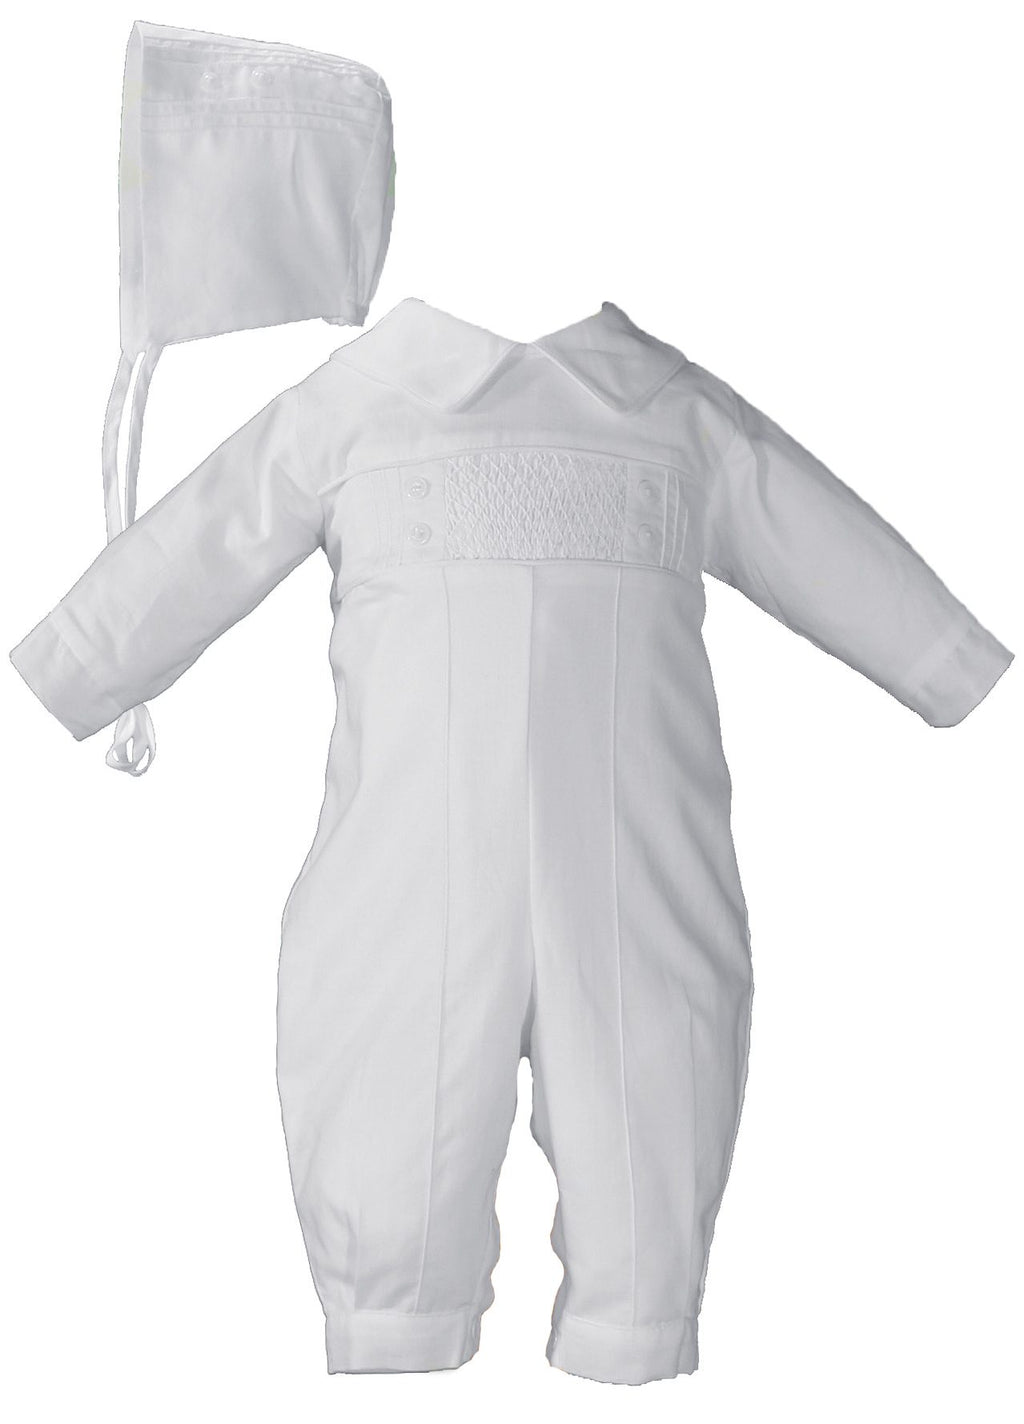 Boys Long Sleeve Cotton Hand Smocked Pin Tucked Christening Baptism Coverall #CB9381